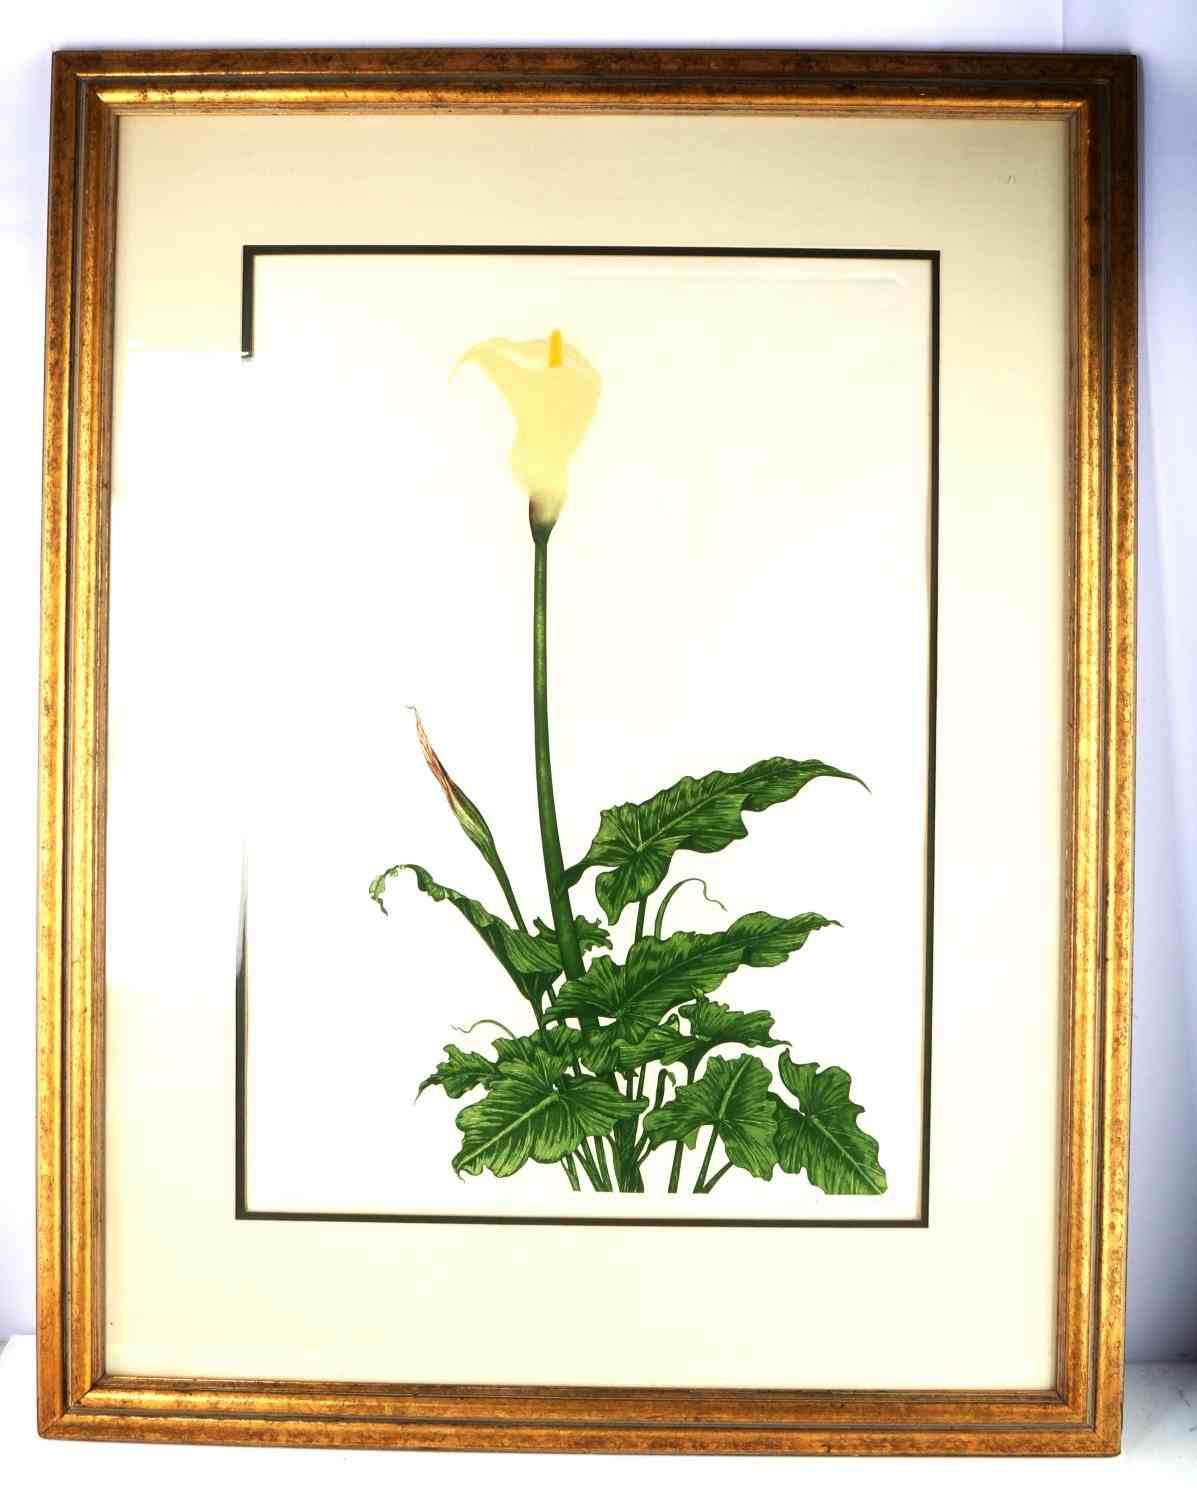 SIGNED ARNOLD IGER LITHOGRAPH "CALLA LILY" FRAMED